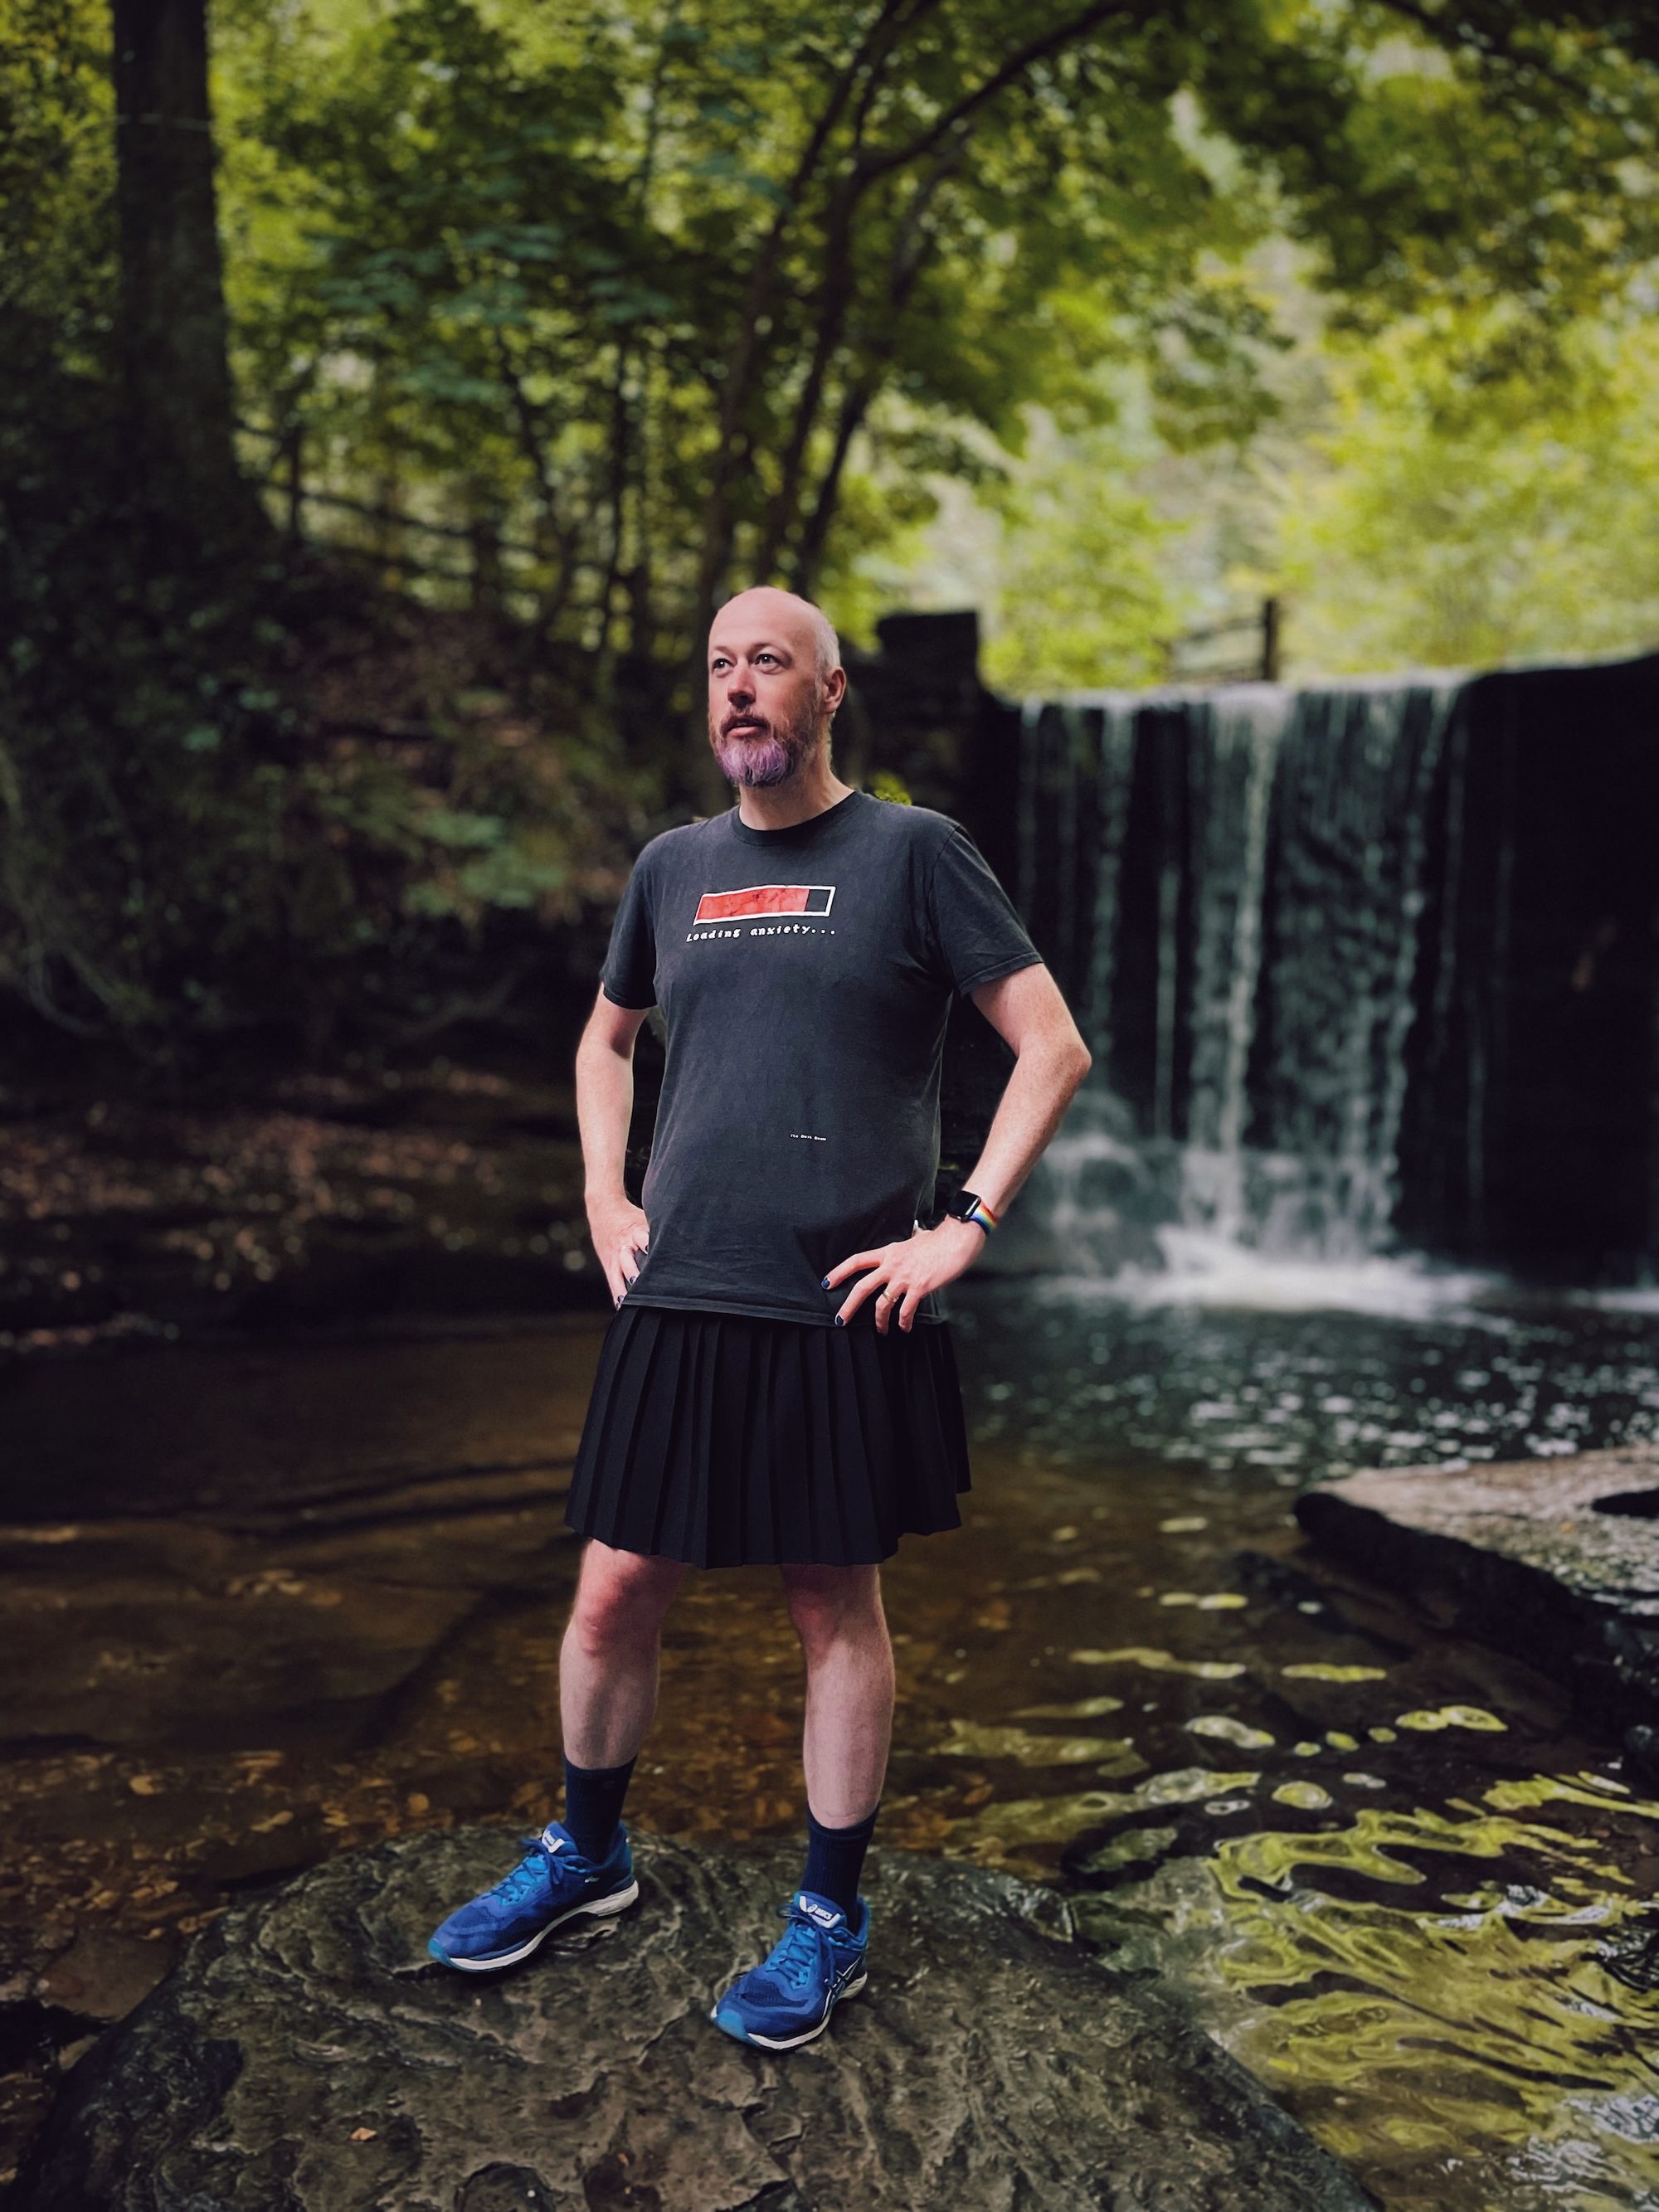 Non-binary person wearing a black skirt and t-shirt standing on rocks by a waterfall.